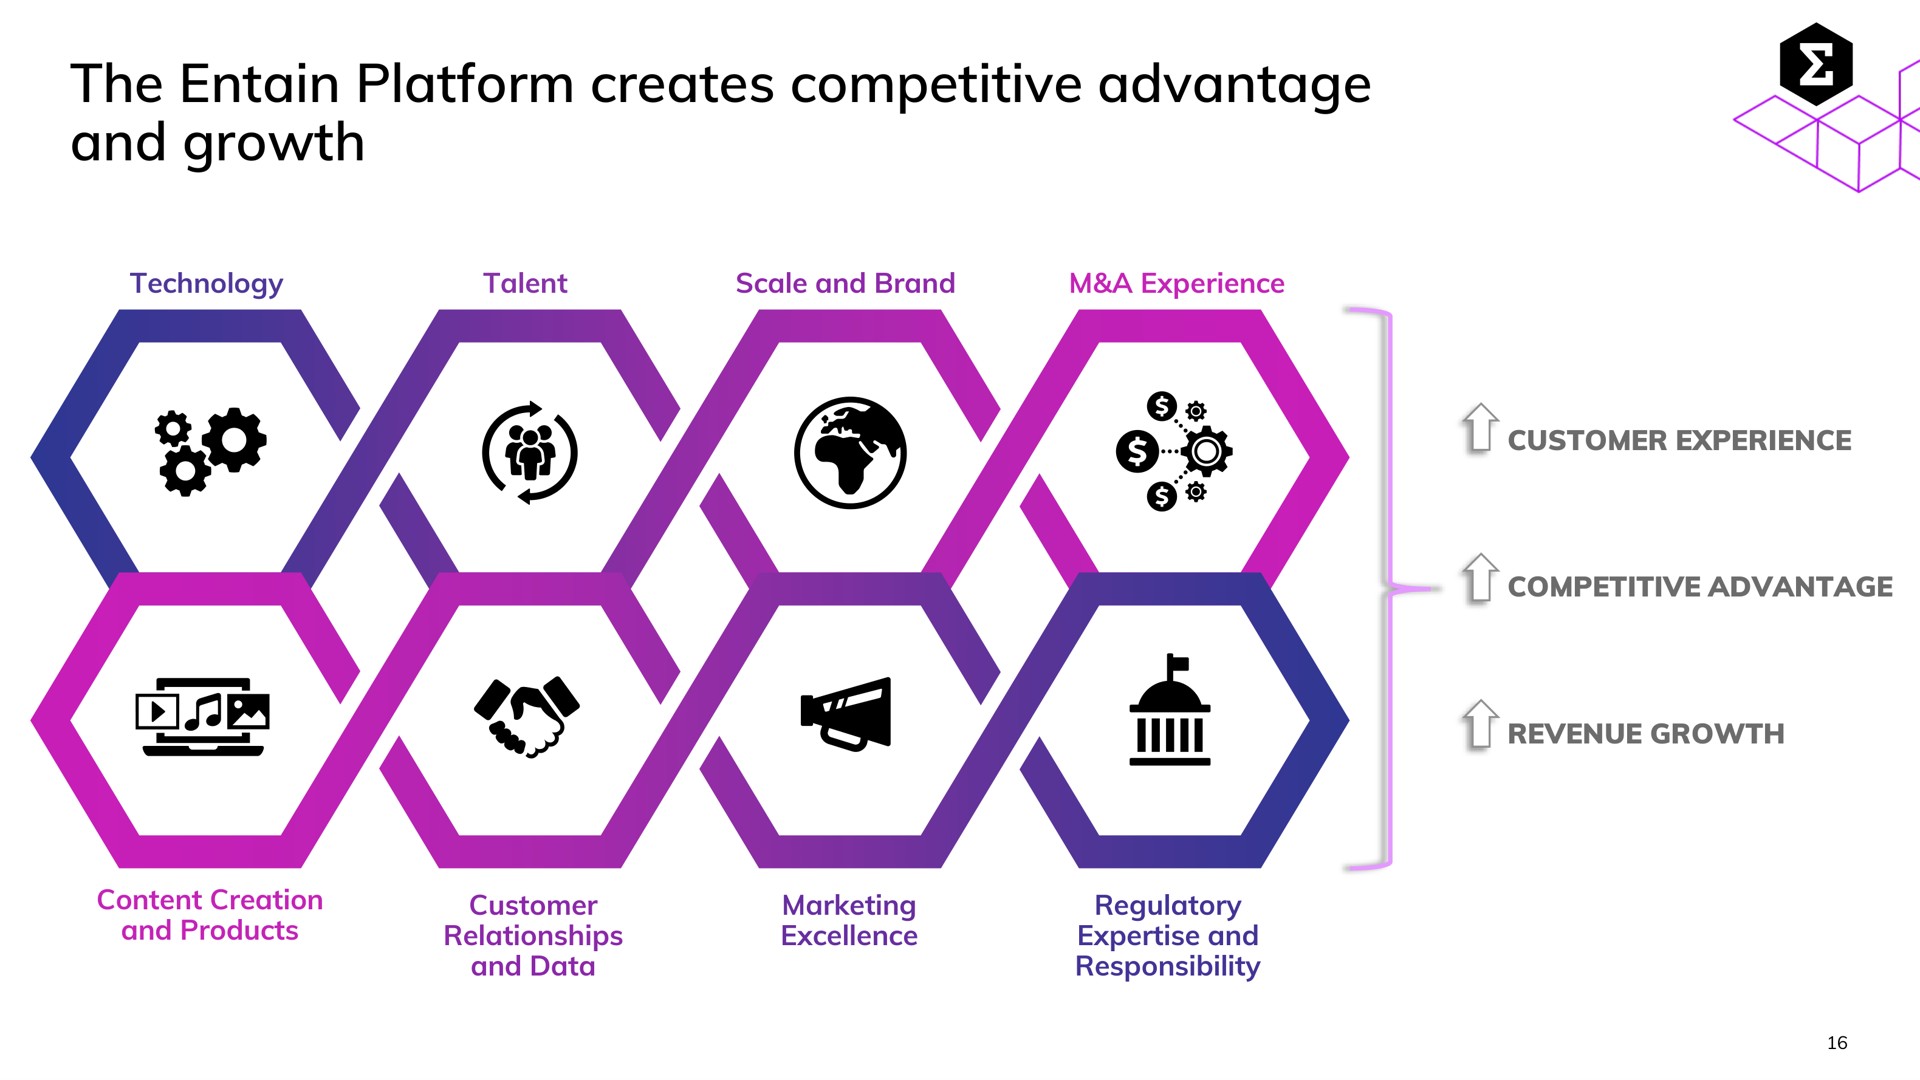 the platform creates competitive advantage and growth | Entain Group